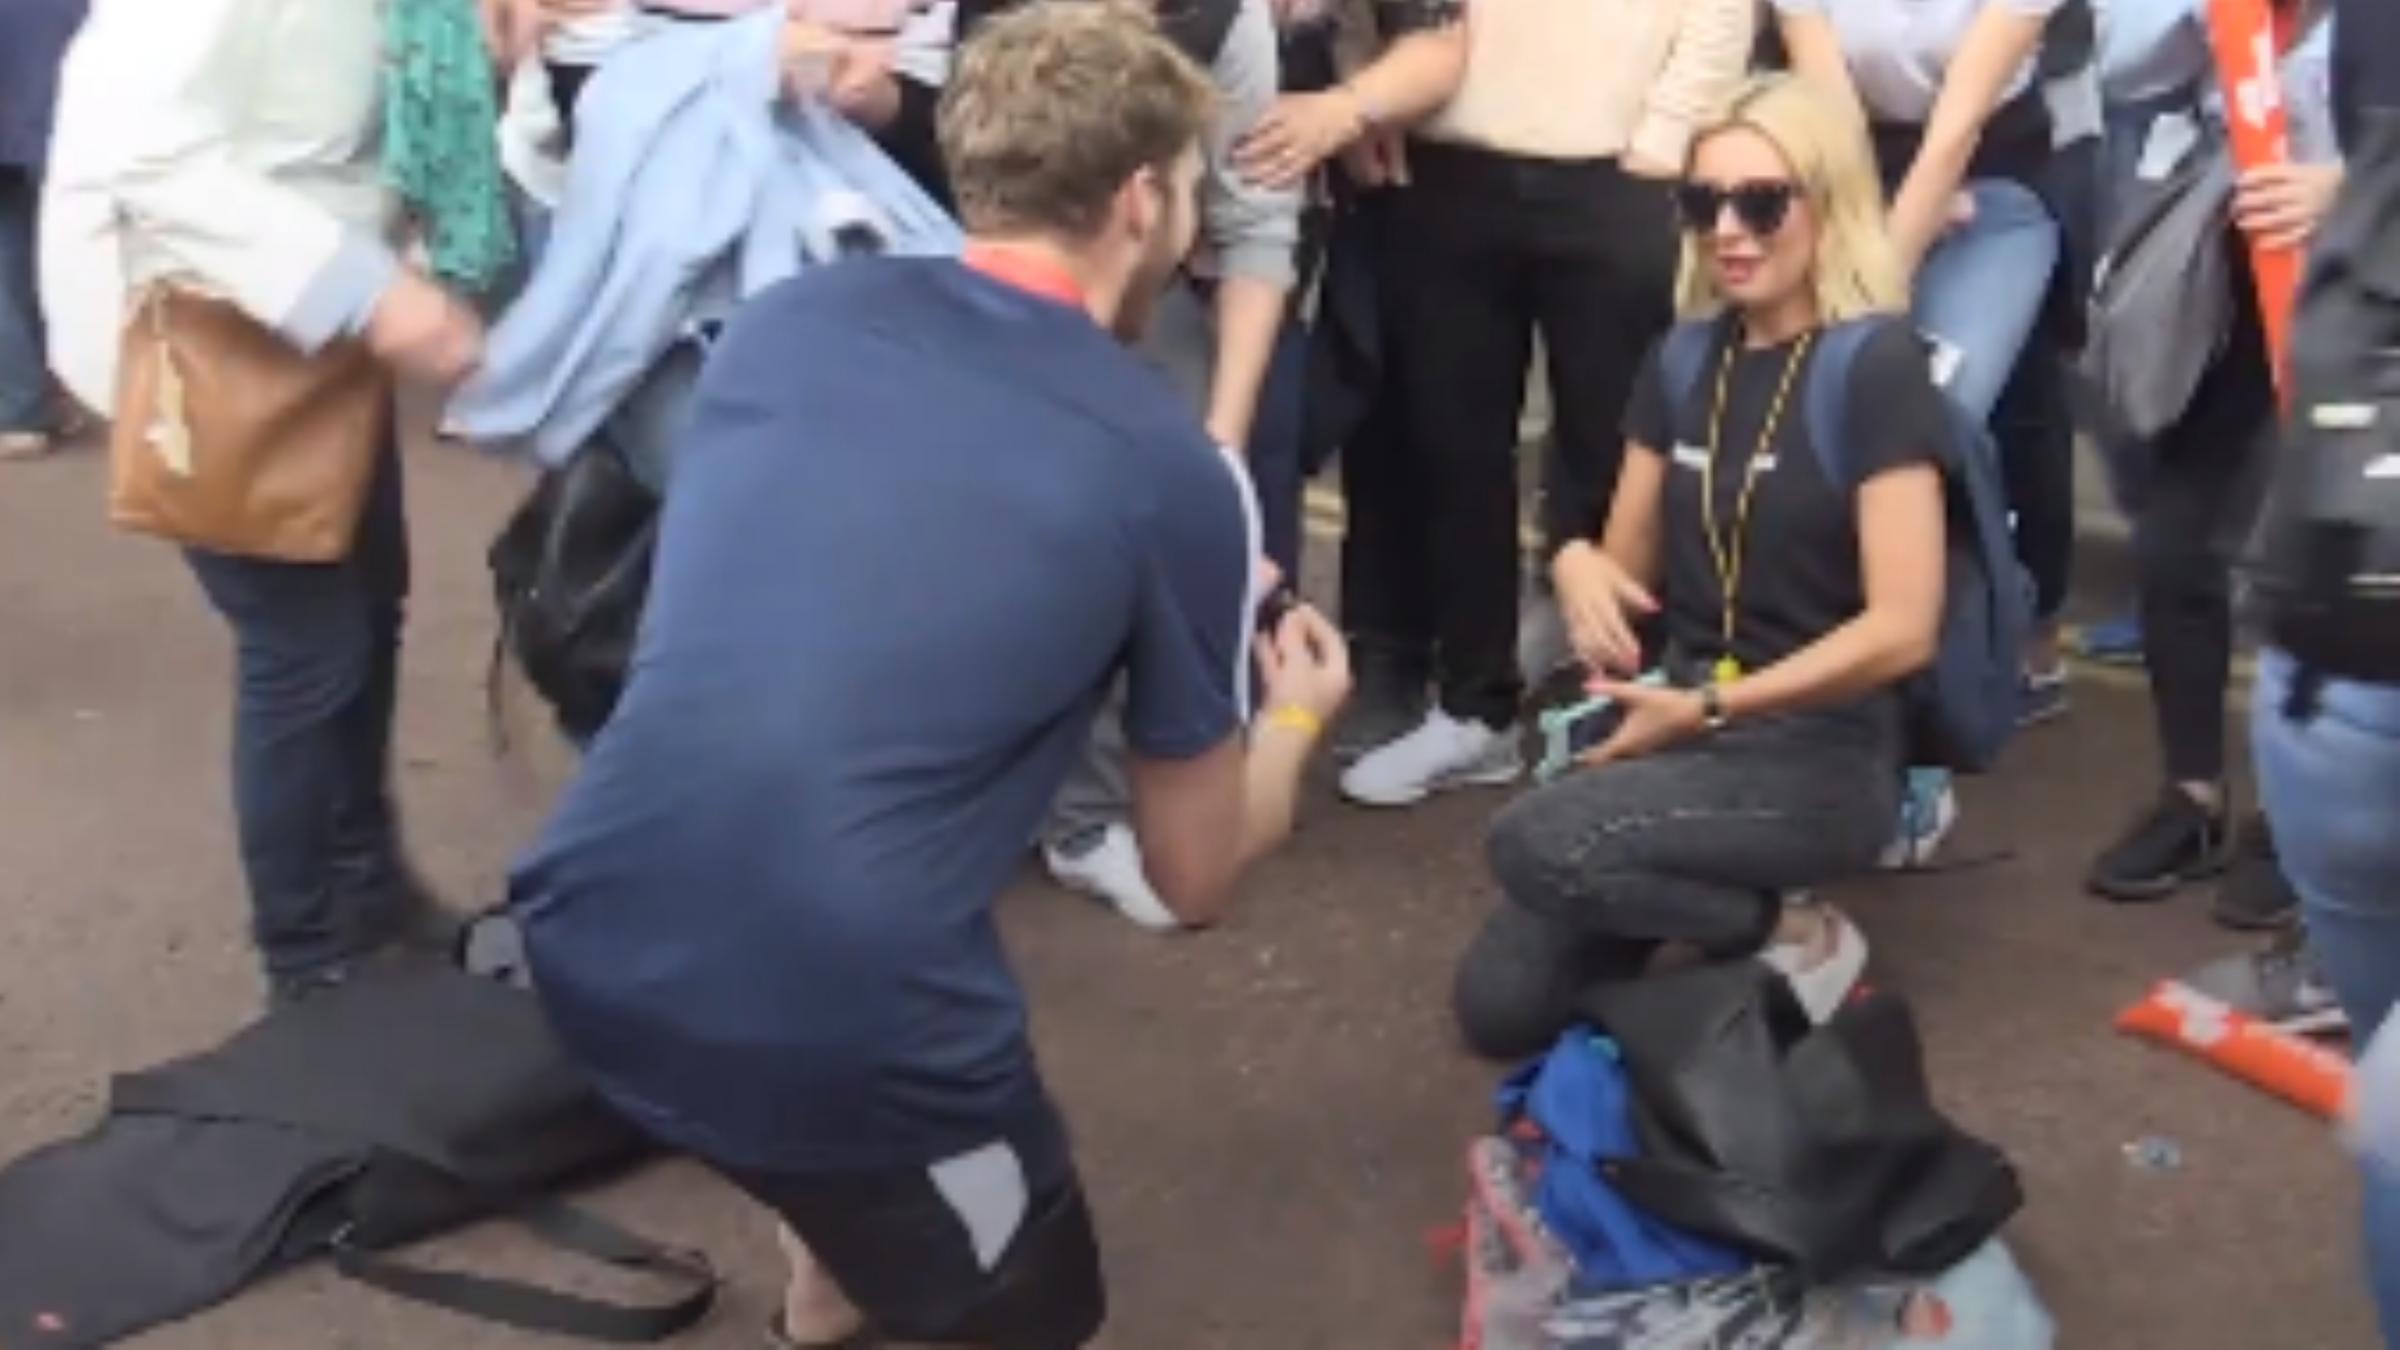 In video: London Marathon runner proposes at the finish line - Bradford Telegraph and Argus